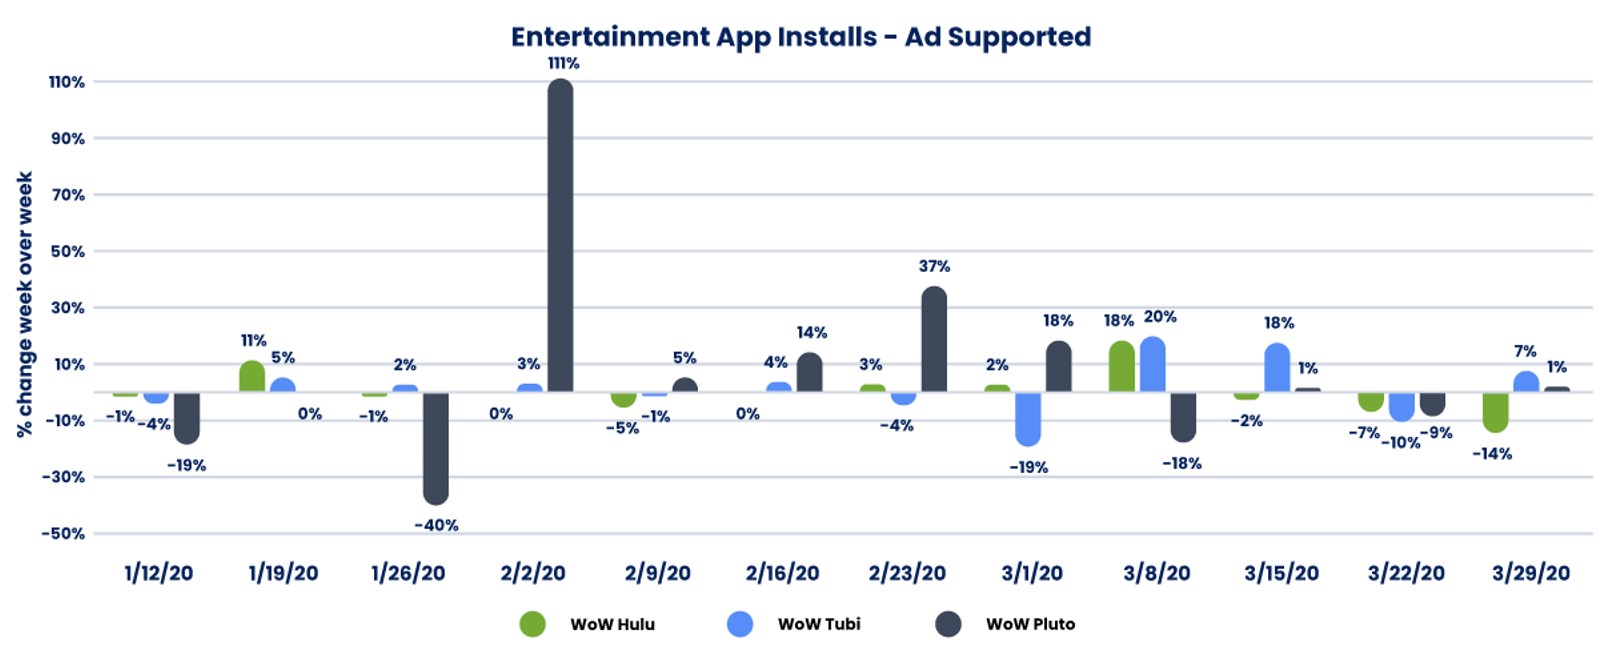 Ad Supported Entertainment Apps